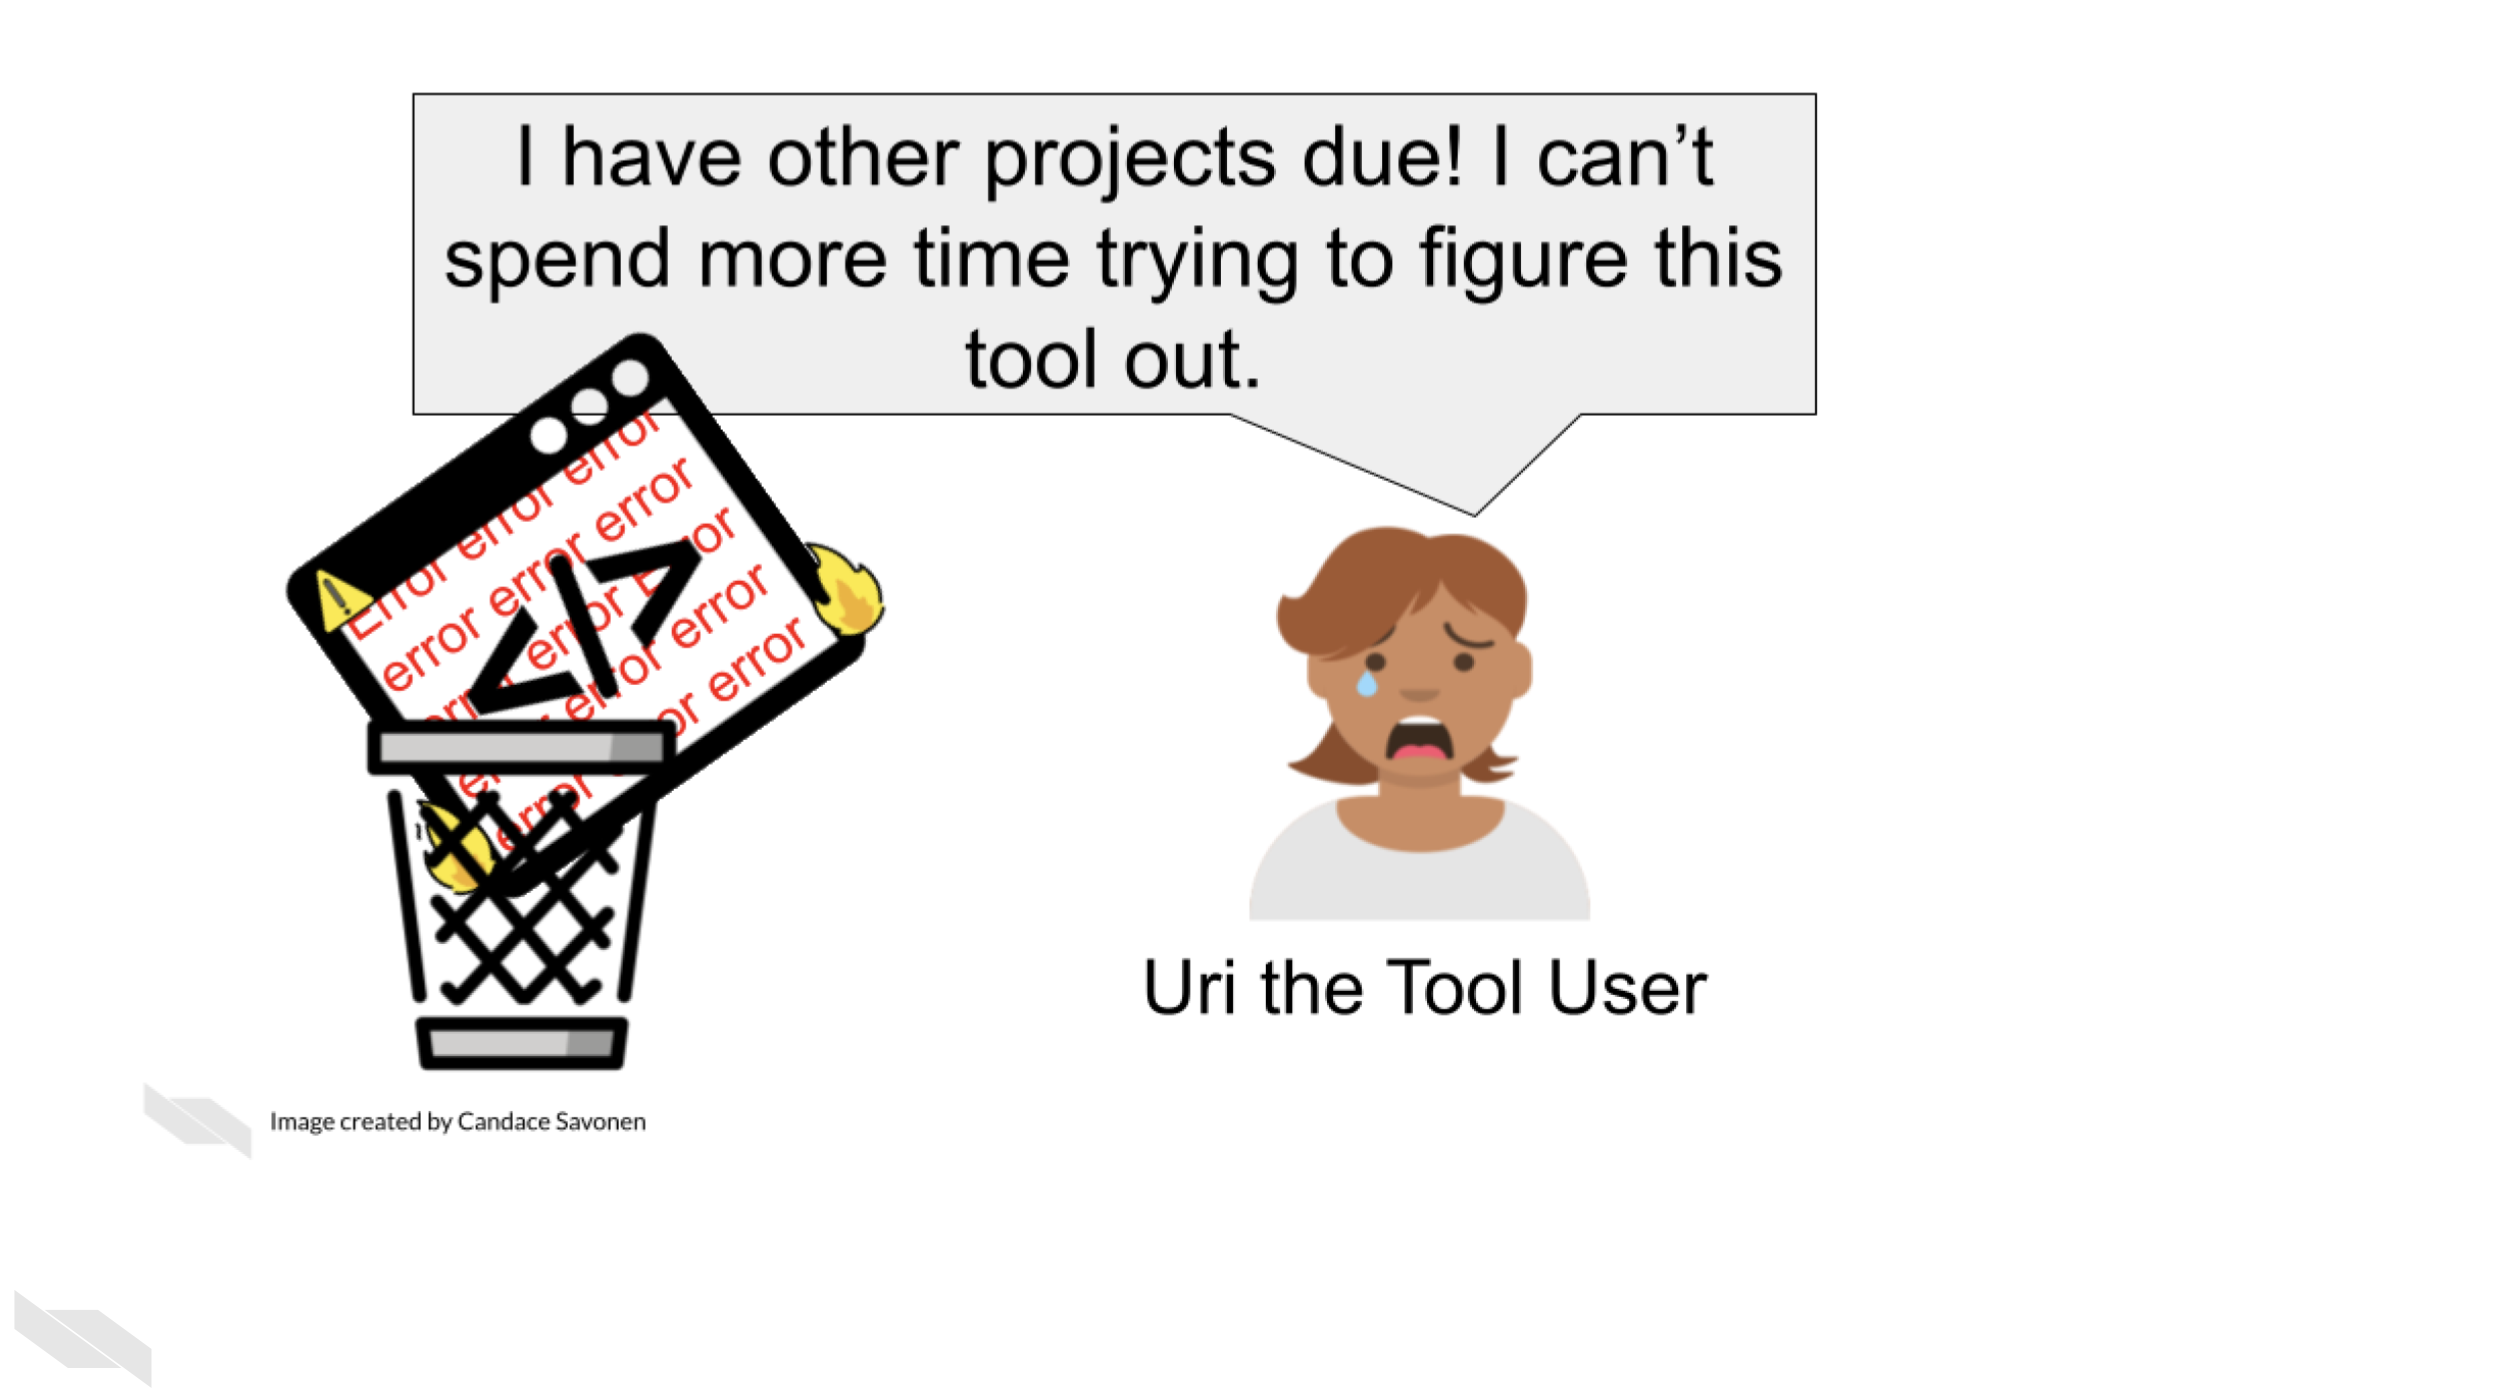 Uri the Tool User says I have other projects due! I can’t spend more time trying to figure this tool out. Tina’s awesome tool is still on fire with errors written all over it but has been thrown in a wastebasket by Uri the Tool User. There is no documentation to help Uri the Tool user figure out how to use Tina’s awesome tool. Uri the Tool User is even more distressed and has a tear in their eye from frustration. 